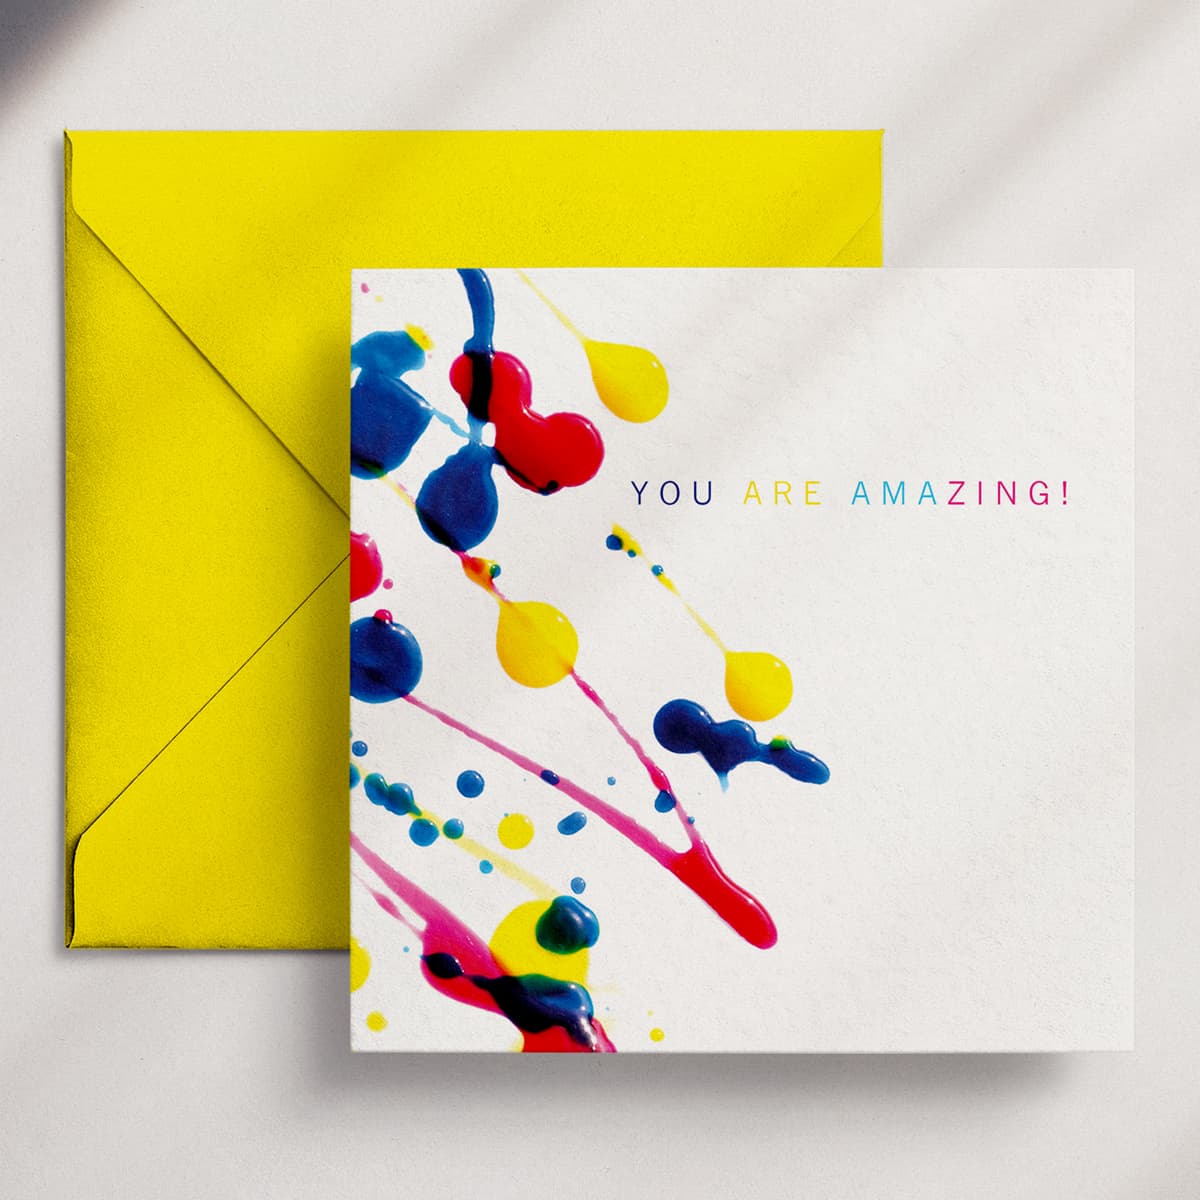 You Are Amazing! - Greeting Card